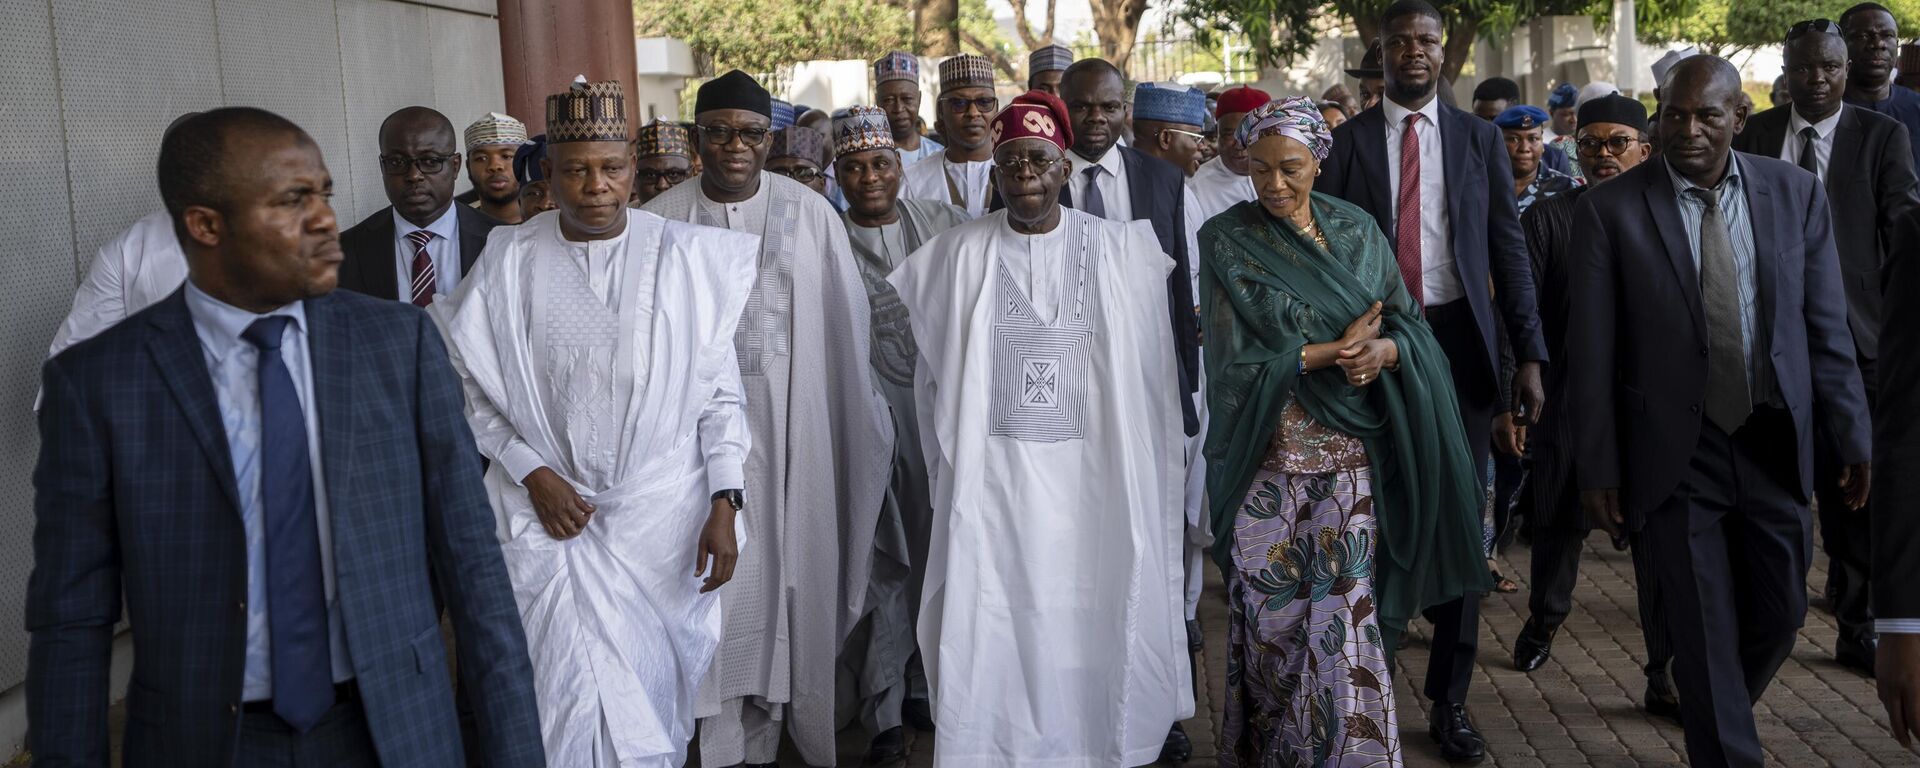 President-Elect Bola Tinubu, center, walks with his wife Oluremi Tinubu, center right, to receive his certificate at a ceremony in Abuja, Nigeria, Wednesday, March 1, 2023. Election officials declared Tinubu the winner of Nigeria's presidential election Wednesday, keeping the ruling party in power in Africa's most populous nation. - Sputnik International, 1920, 02.03.2023